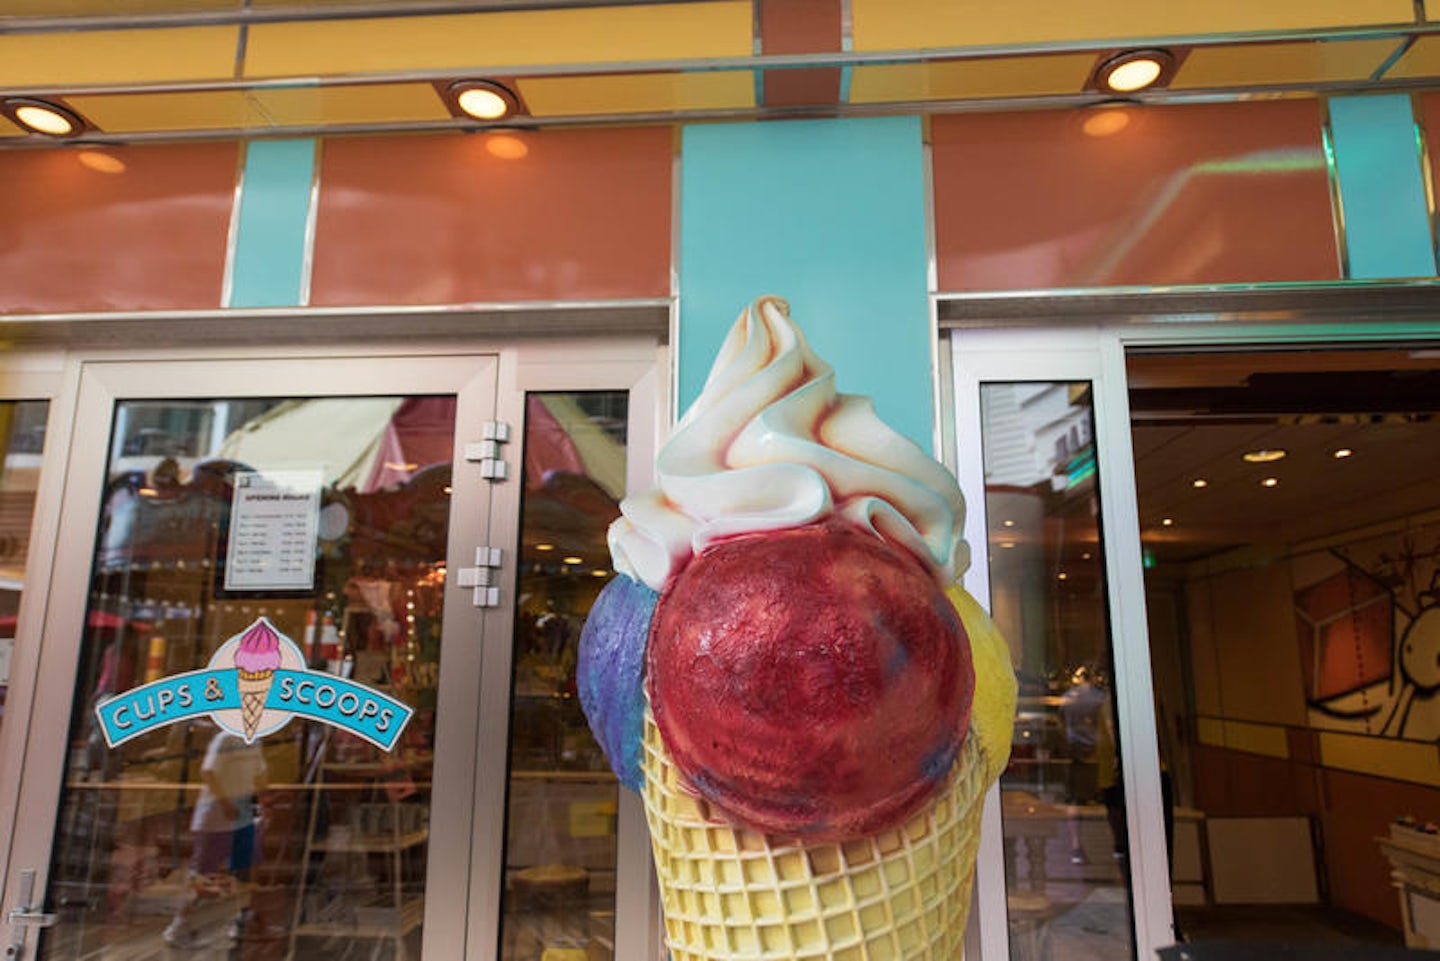 Cups & Scoops on Oasis of the Seas